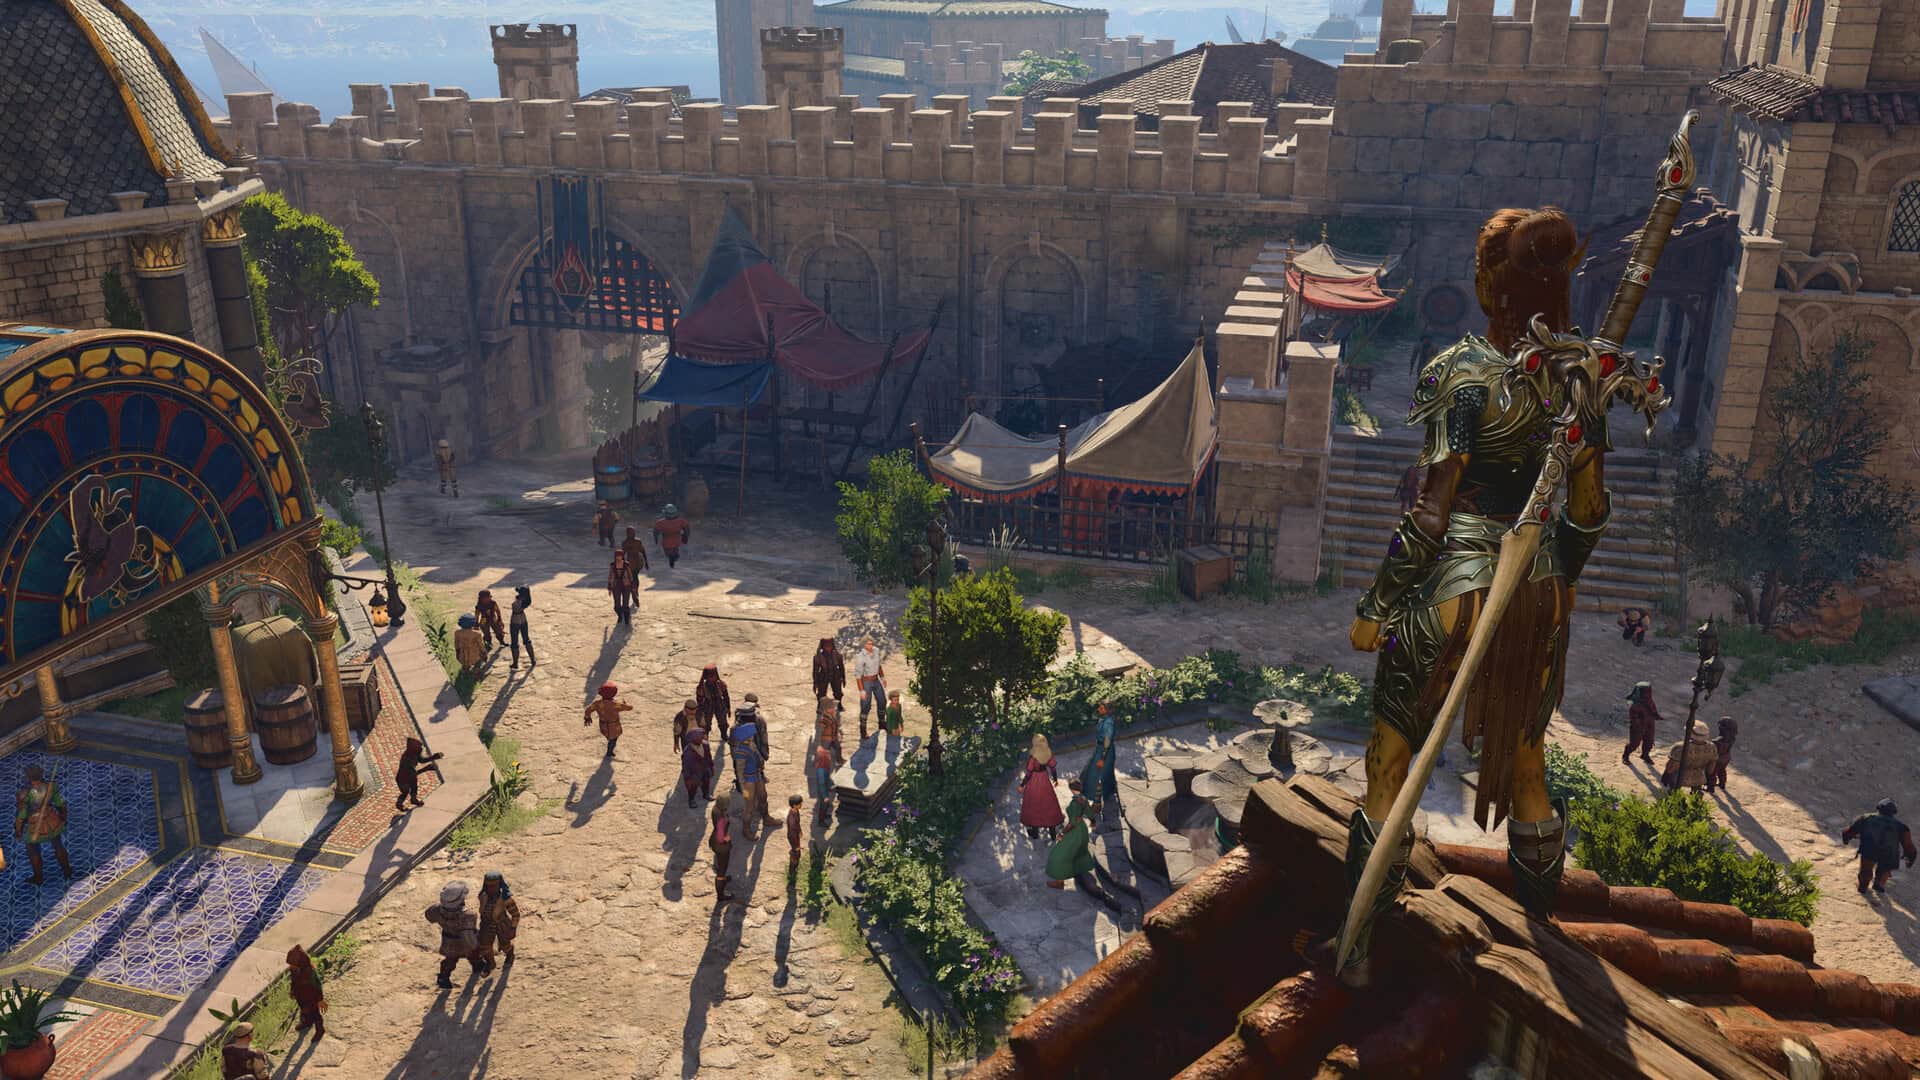 baldur's gate 3 patch 7 release date - A warrior stands on a rooftop overlooking a bustling medieval market